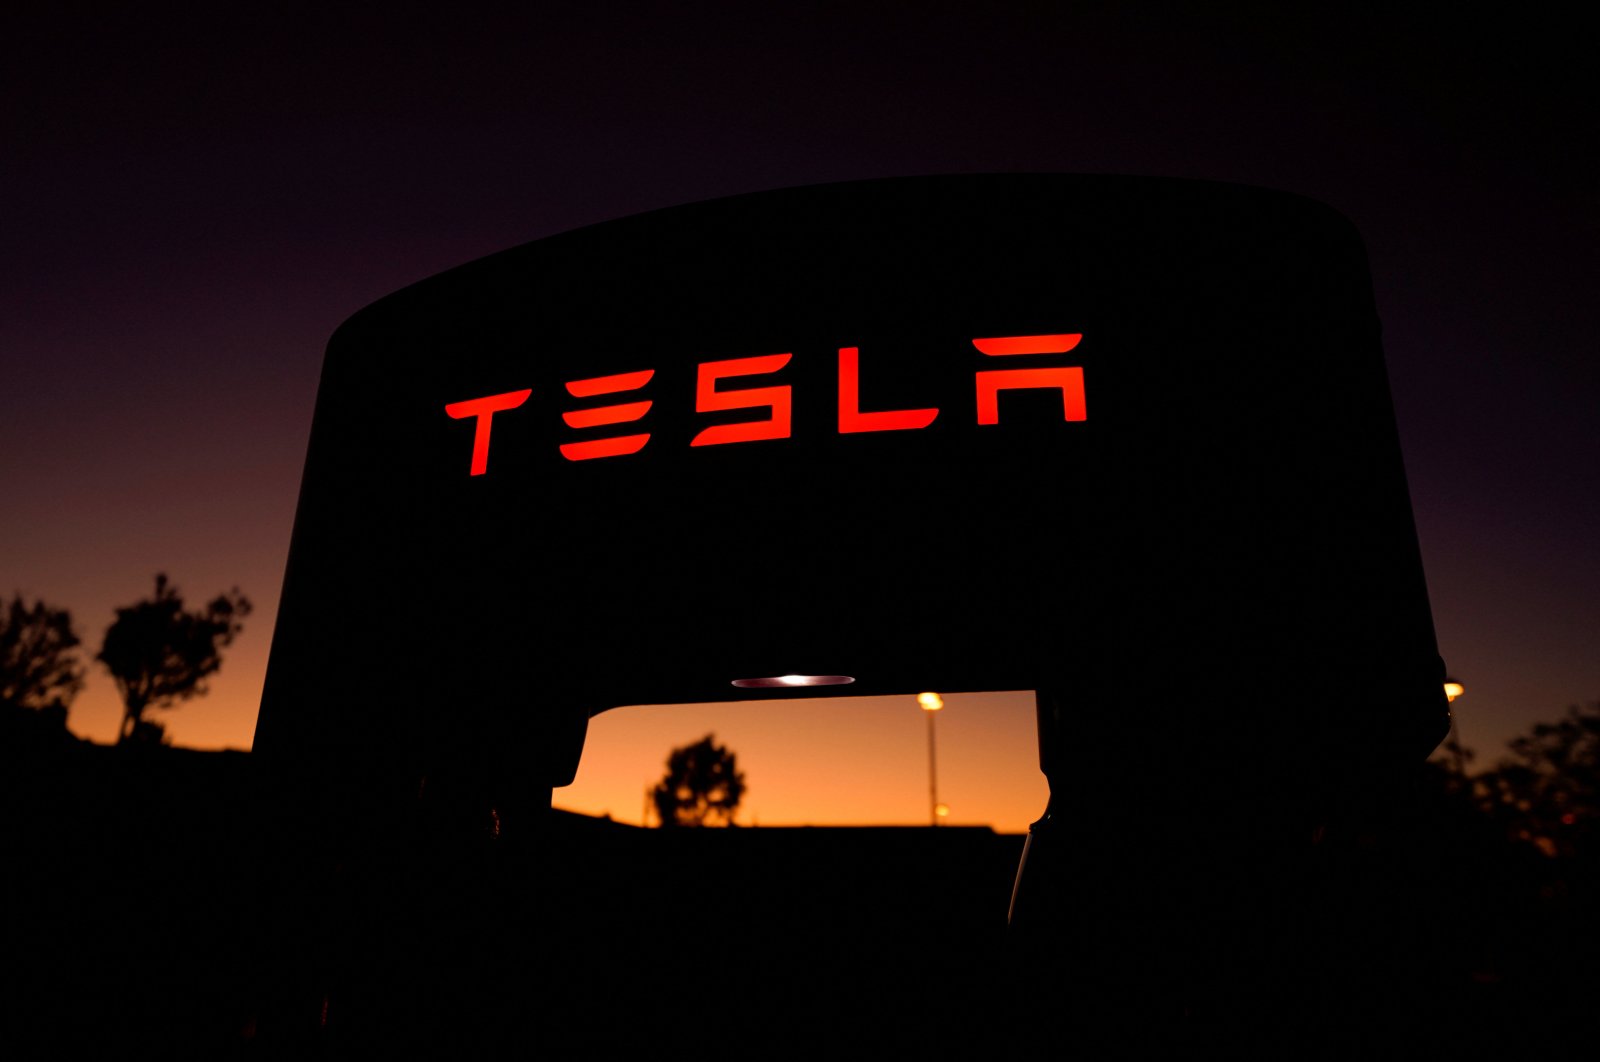 A Tesla supercharger is shown at a charging station in Santa Clarita, California, U.S., Oct. 2, 2019. (Reuters Photo)